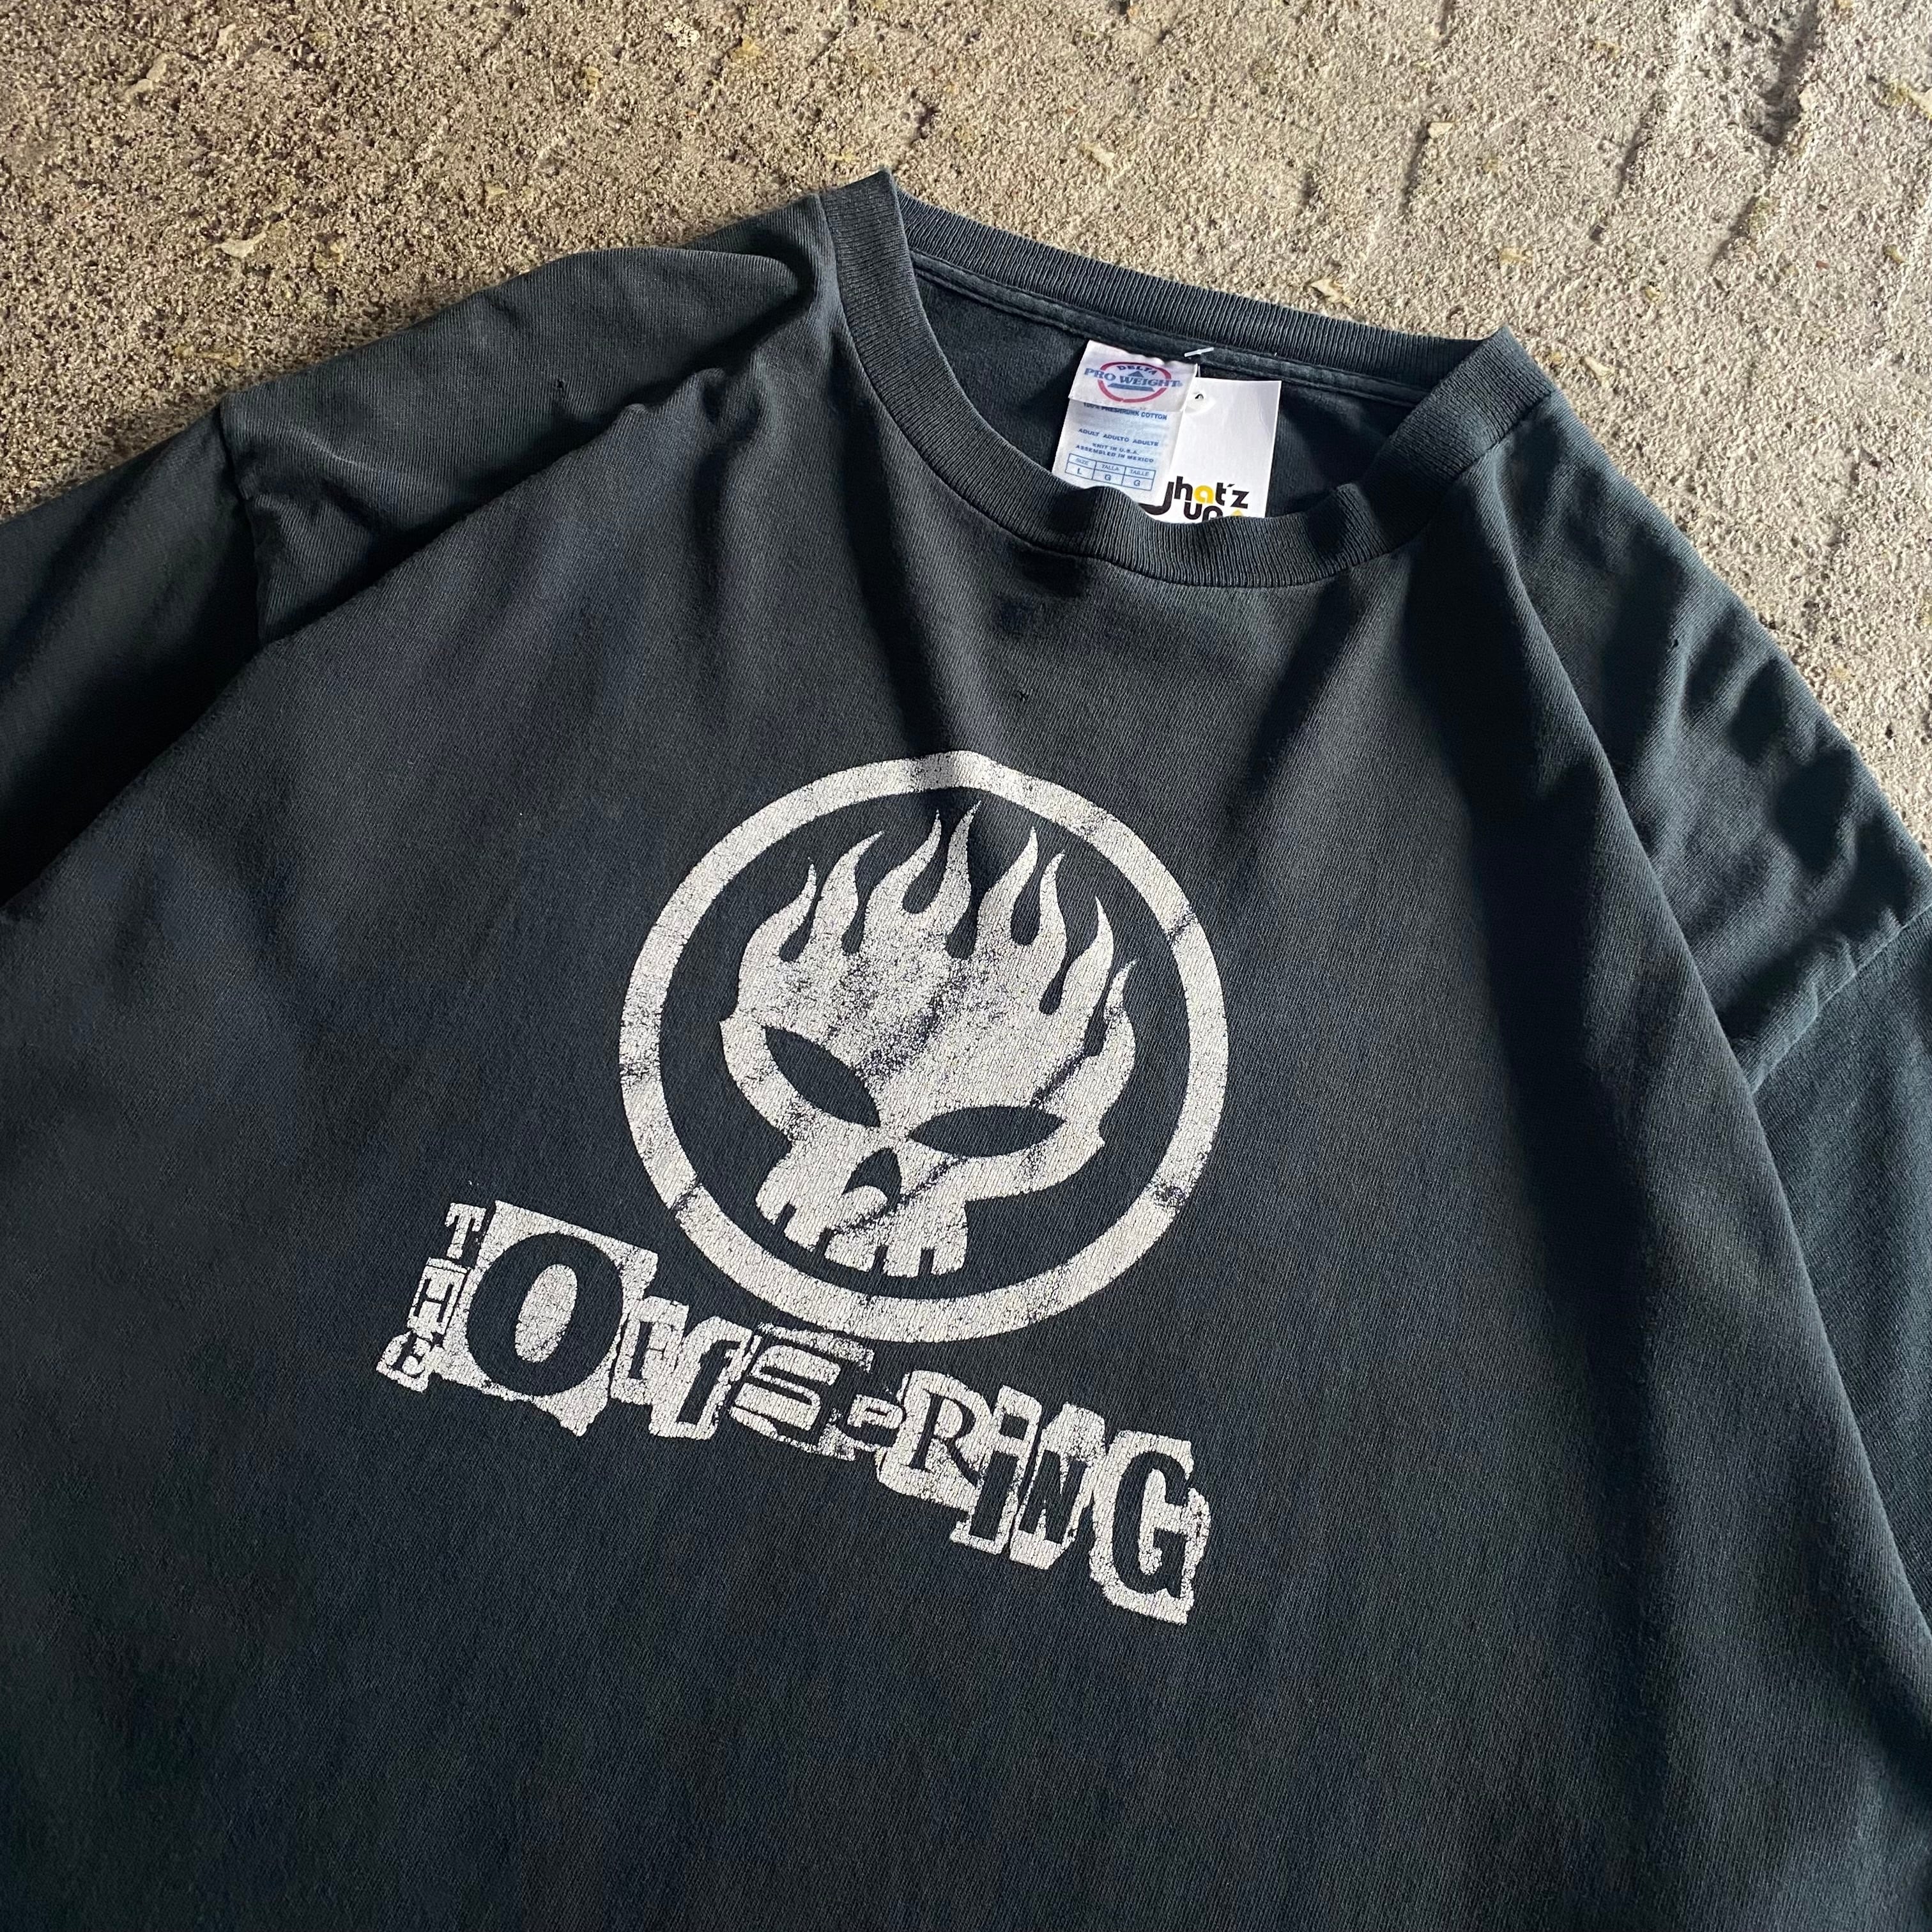 00s THE OFFSPRING T-shirt【仙台店】 | What’z up powered by BASE